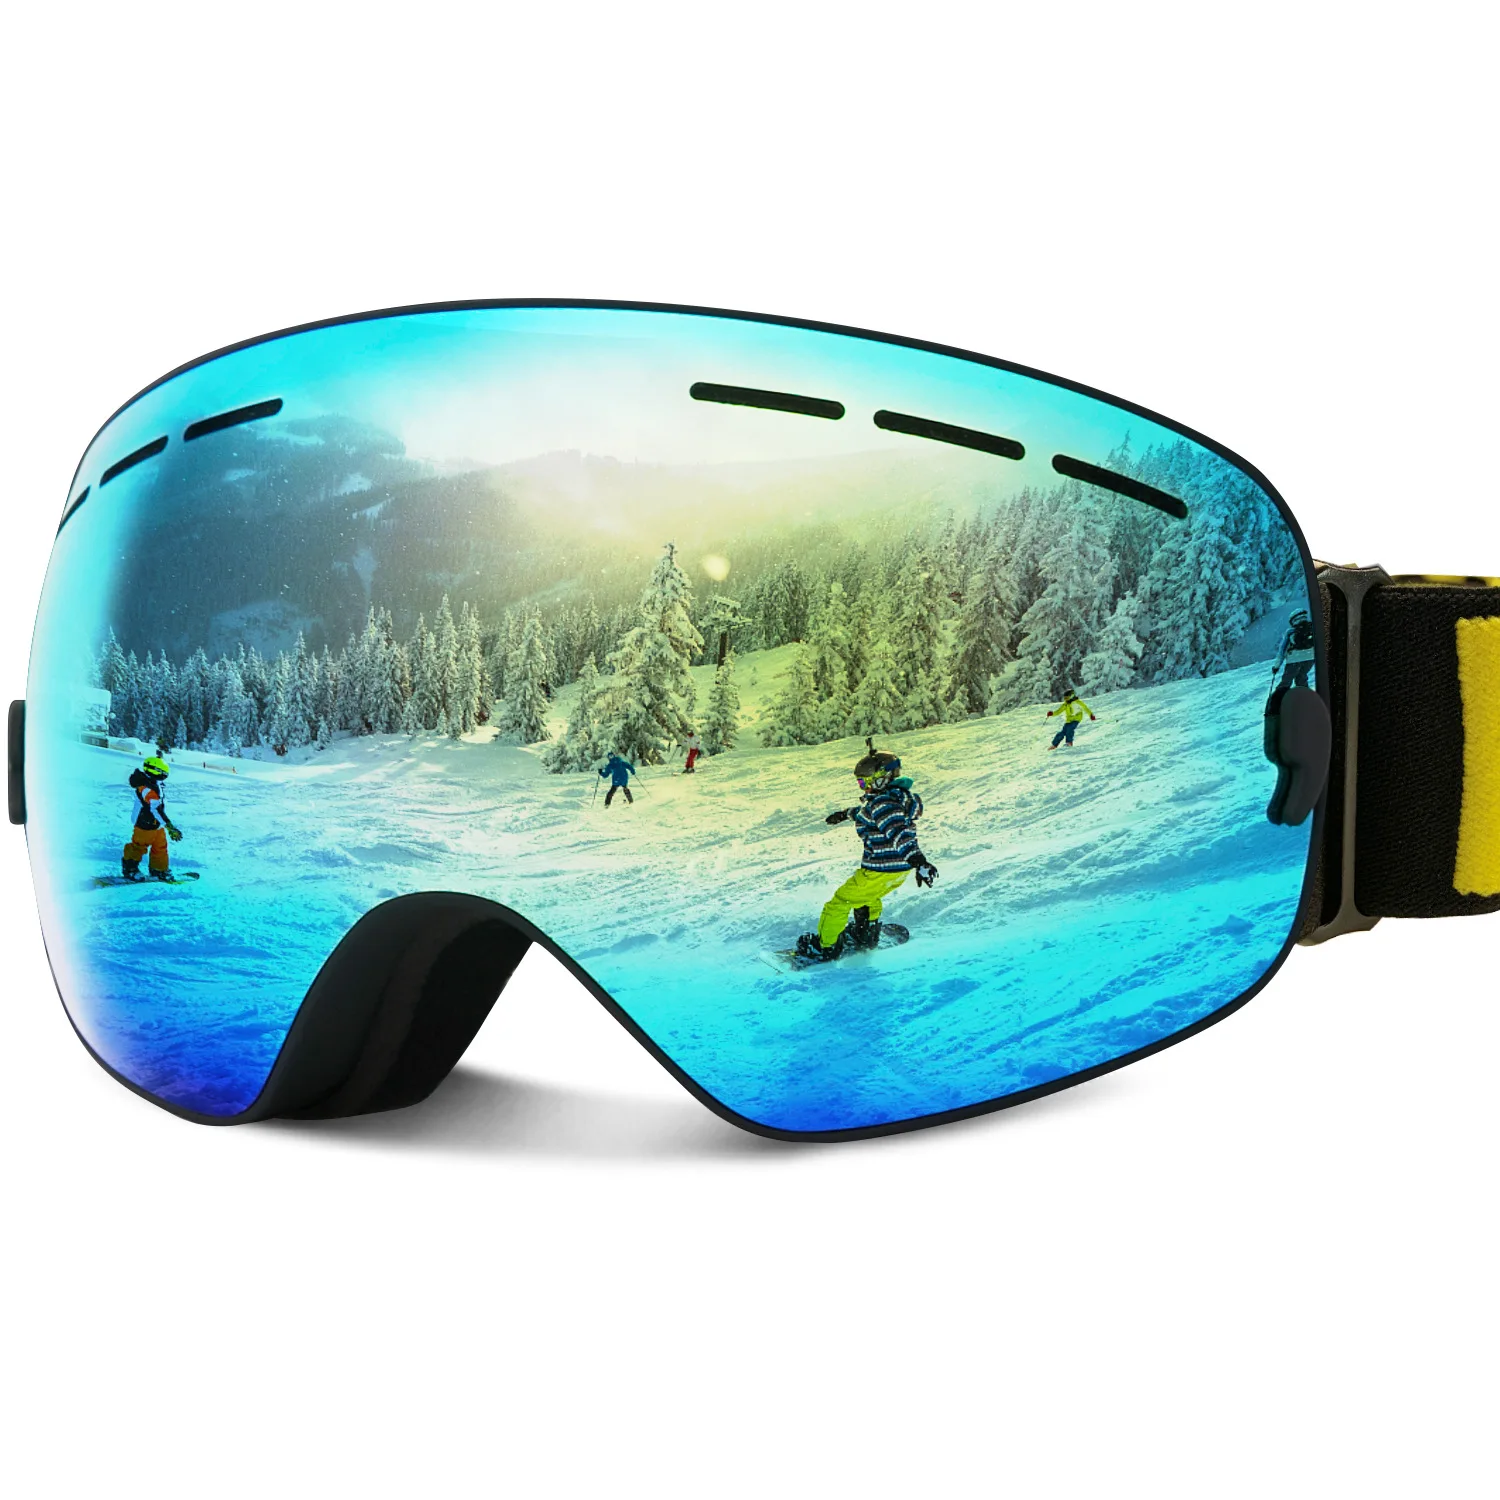 Windproof moisture wicking sweat snow resistant ski goggles blue children's anti-fog double-layer windproof and wear-resistant